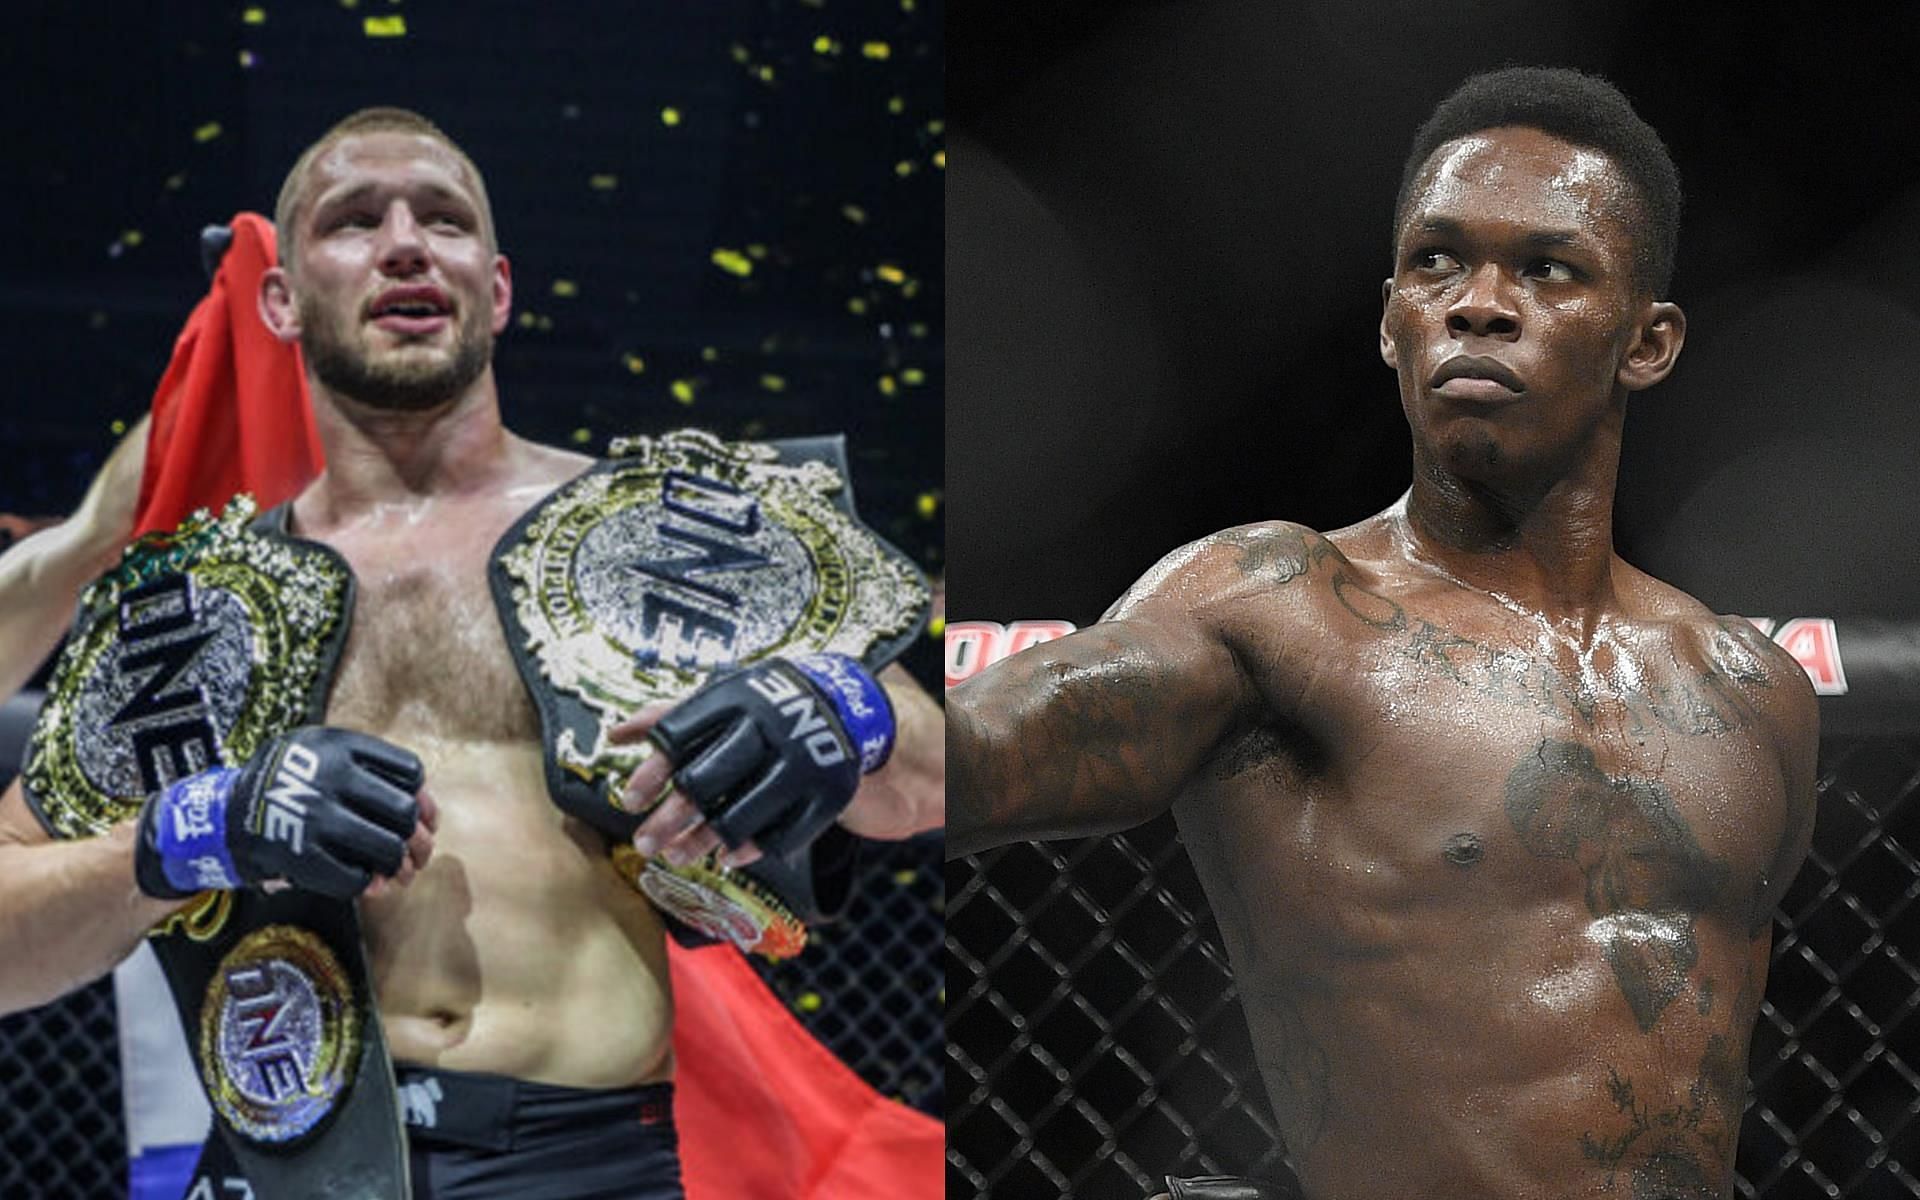 Reinier de Ridder (Left) thinks that Israel Adesanya (Right) will be an easy win for him. | [Photos: ONE Championship/Bleacher Report]